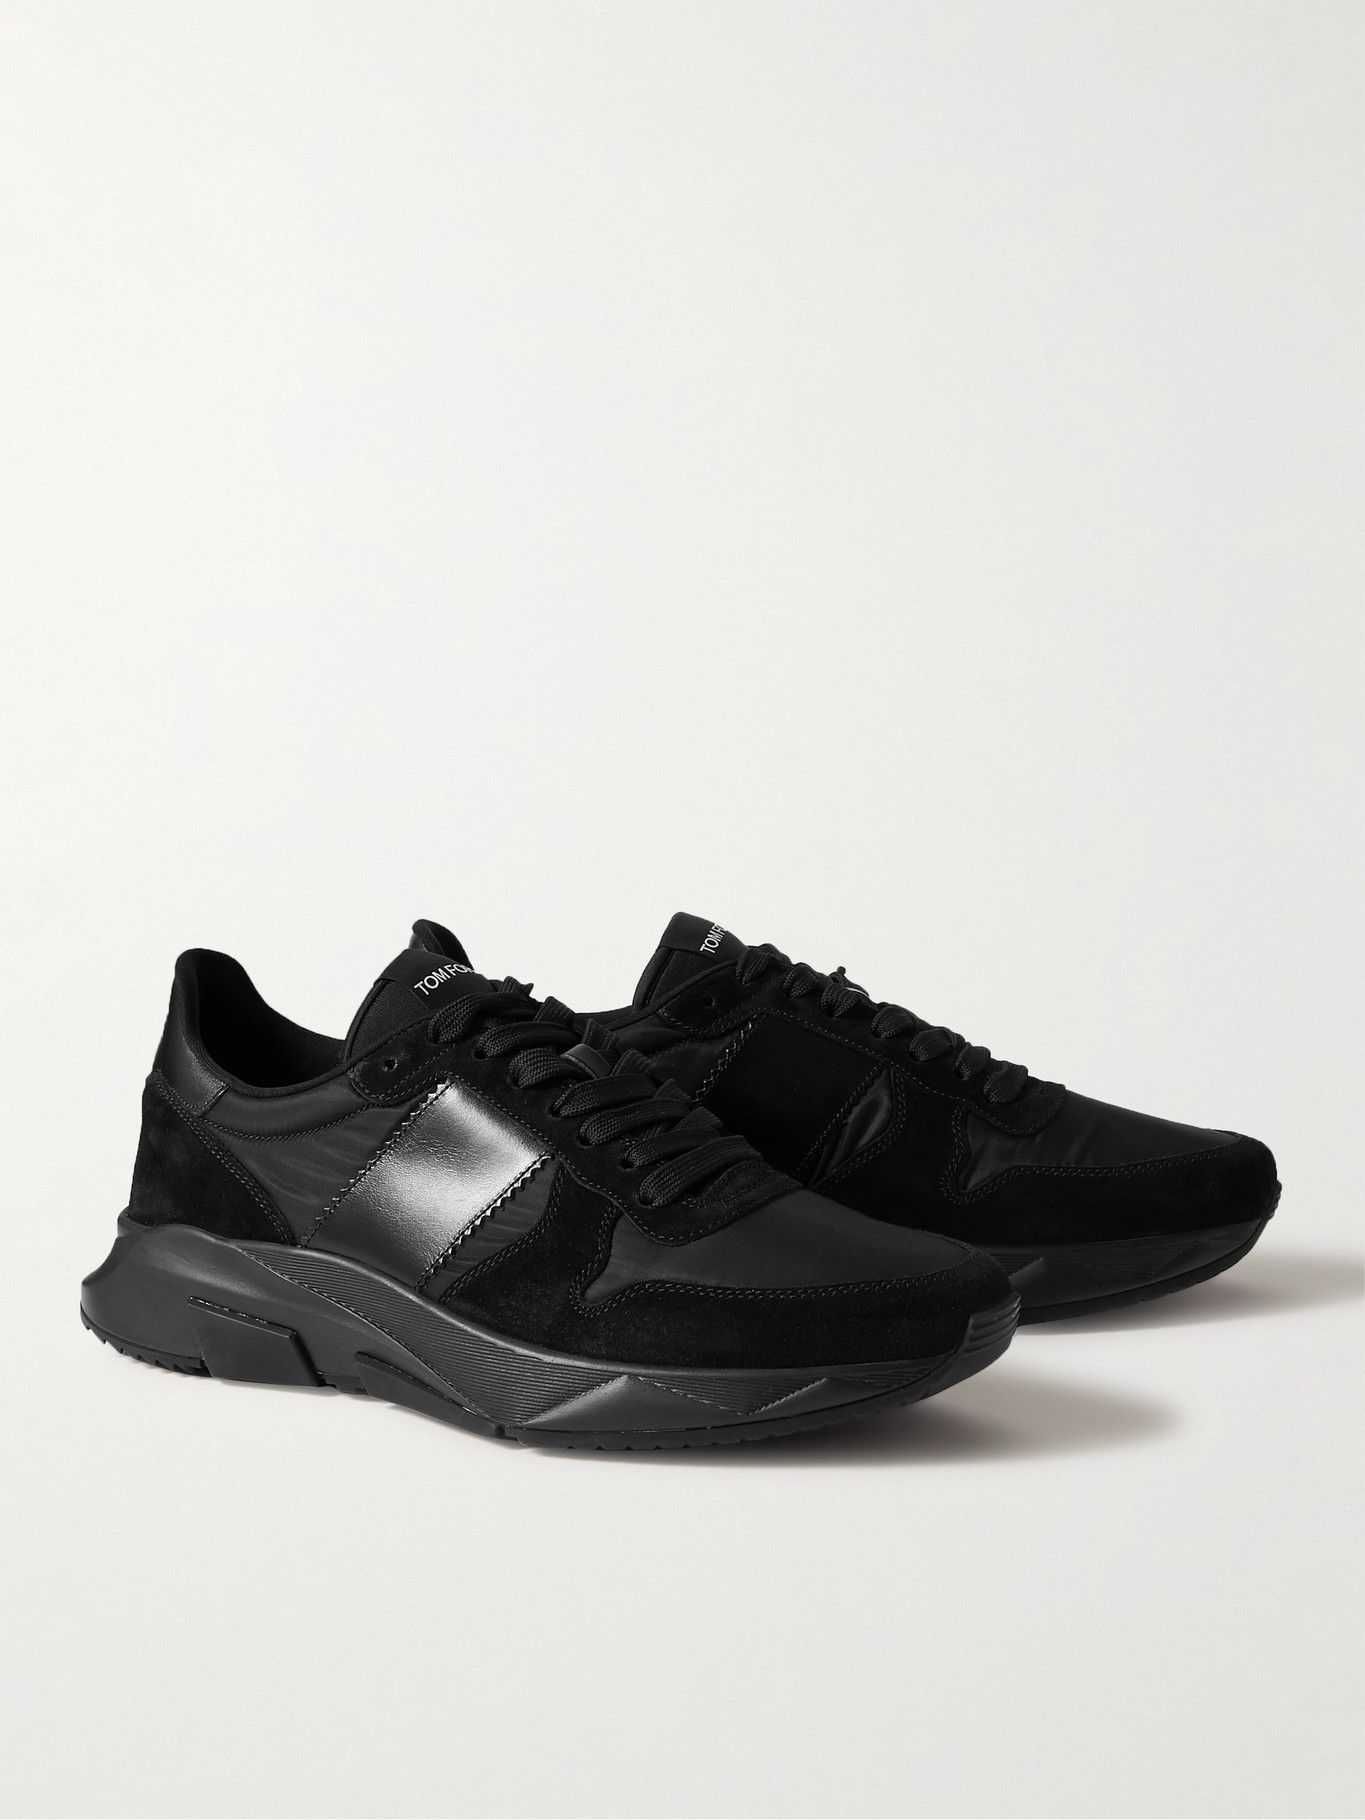 TOM FORD - Jagga Leather-Trimmed Nylon and Suede Sneakers - Black TOM FORD